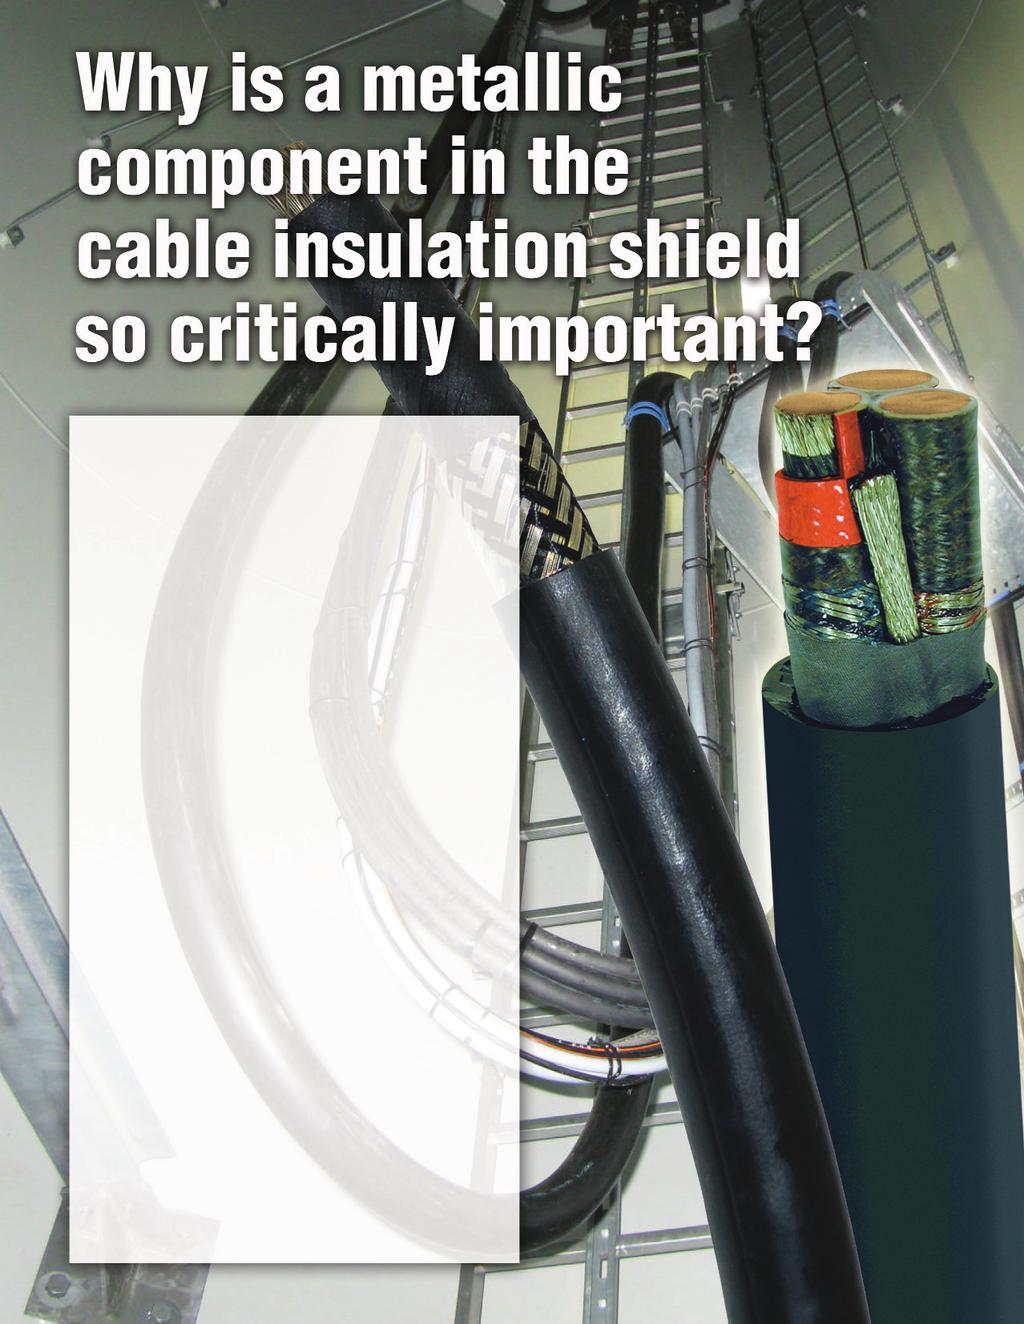 Some medium voltage cables offered to the wind power industry have only an extruded semiconducting insulation shield.